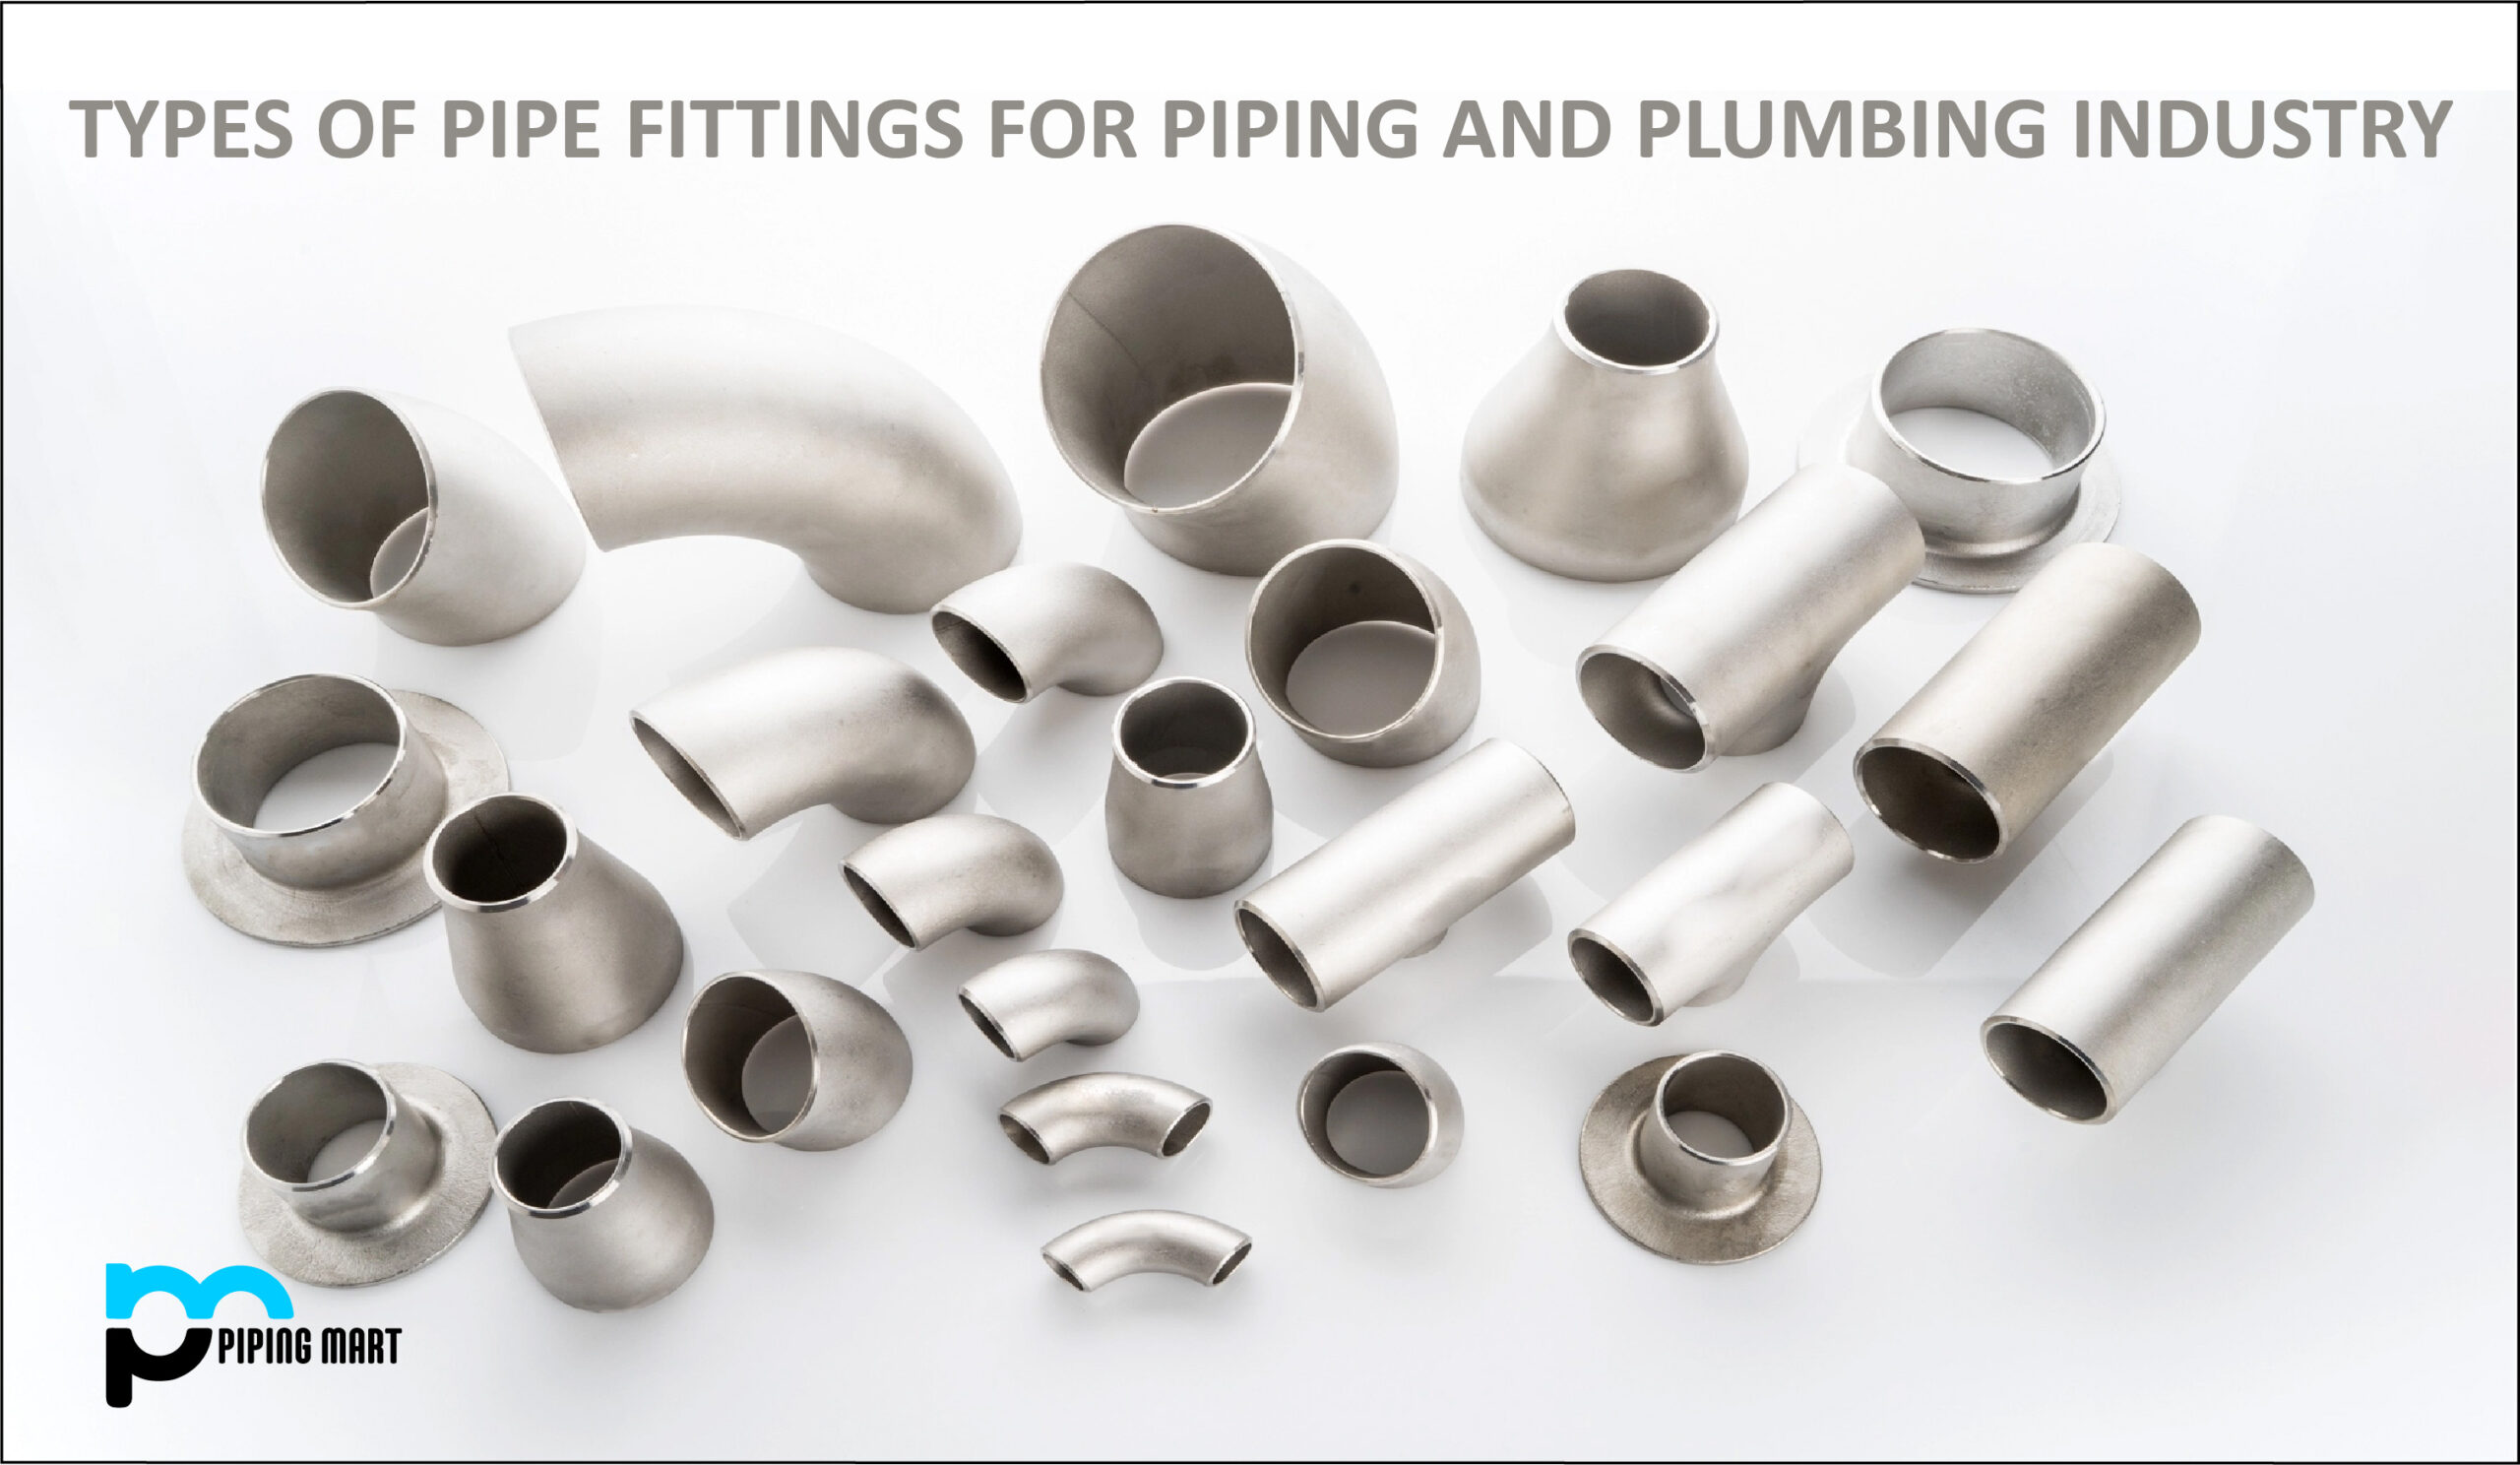 Pipe Fittings for Piping and Plumbing Industry